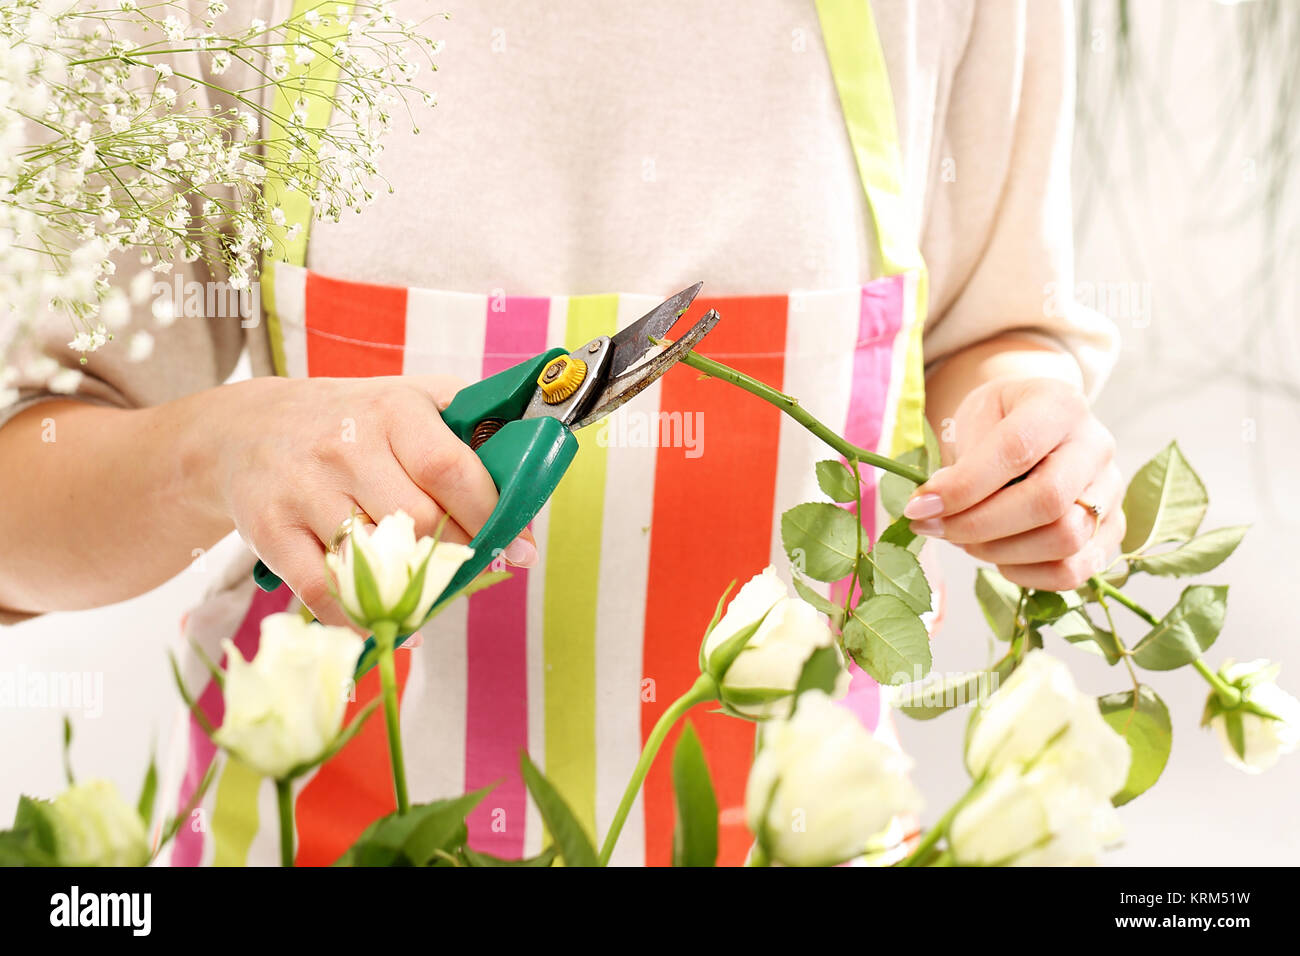 cutting the flower stems Stock Photo